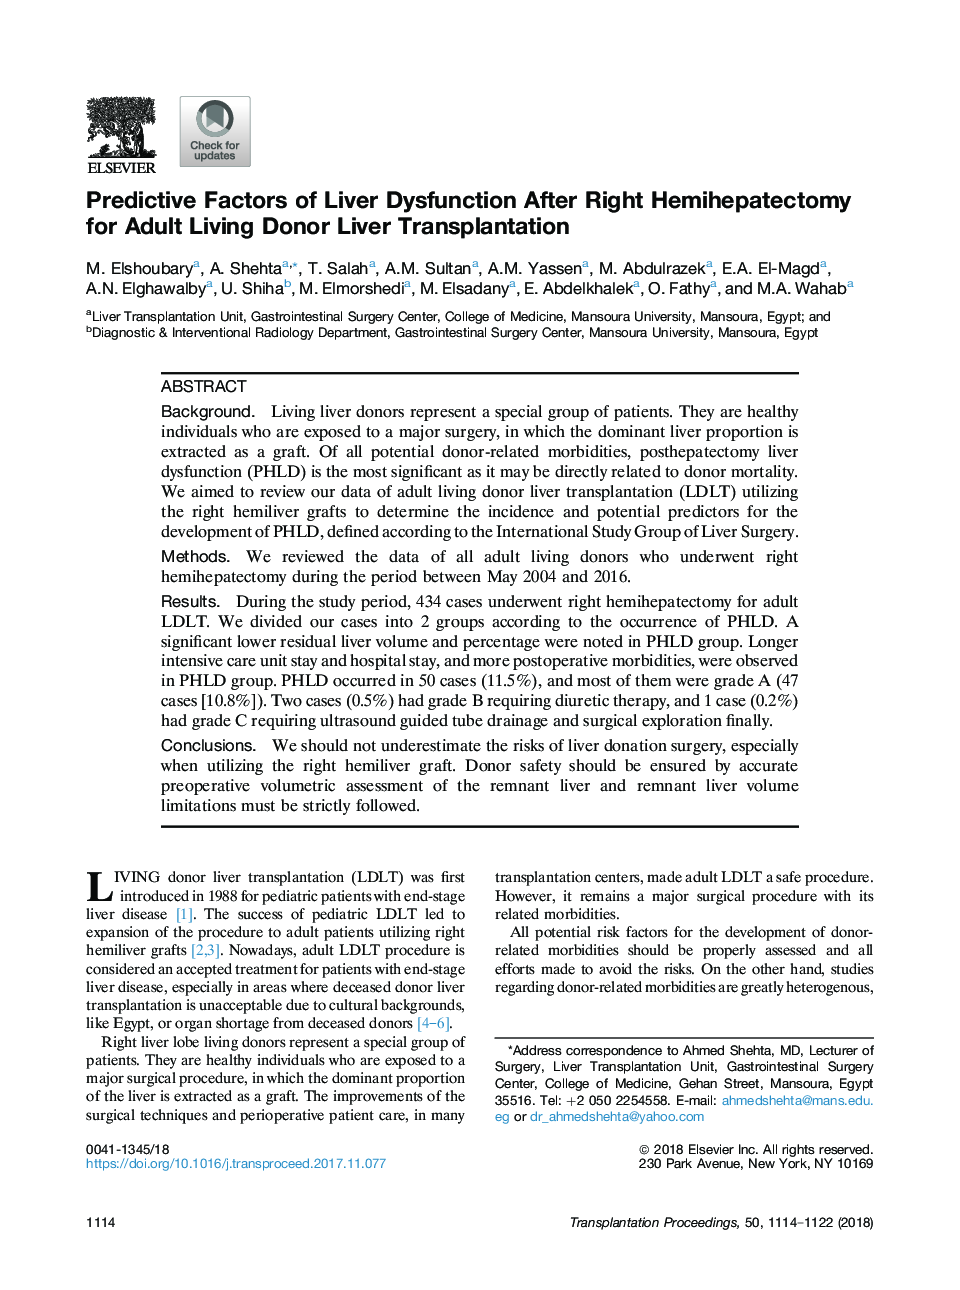 Predictive Factors of Liver Dysfunction After Right Hemihepatectomy for Adult Living Donor Liver Transplantation